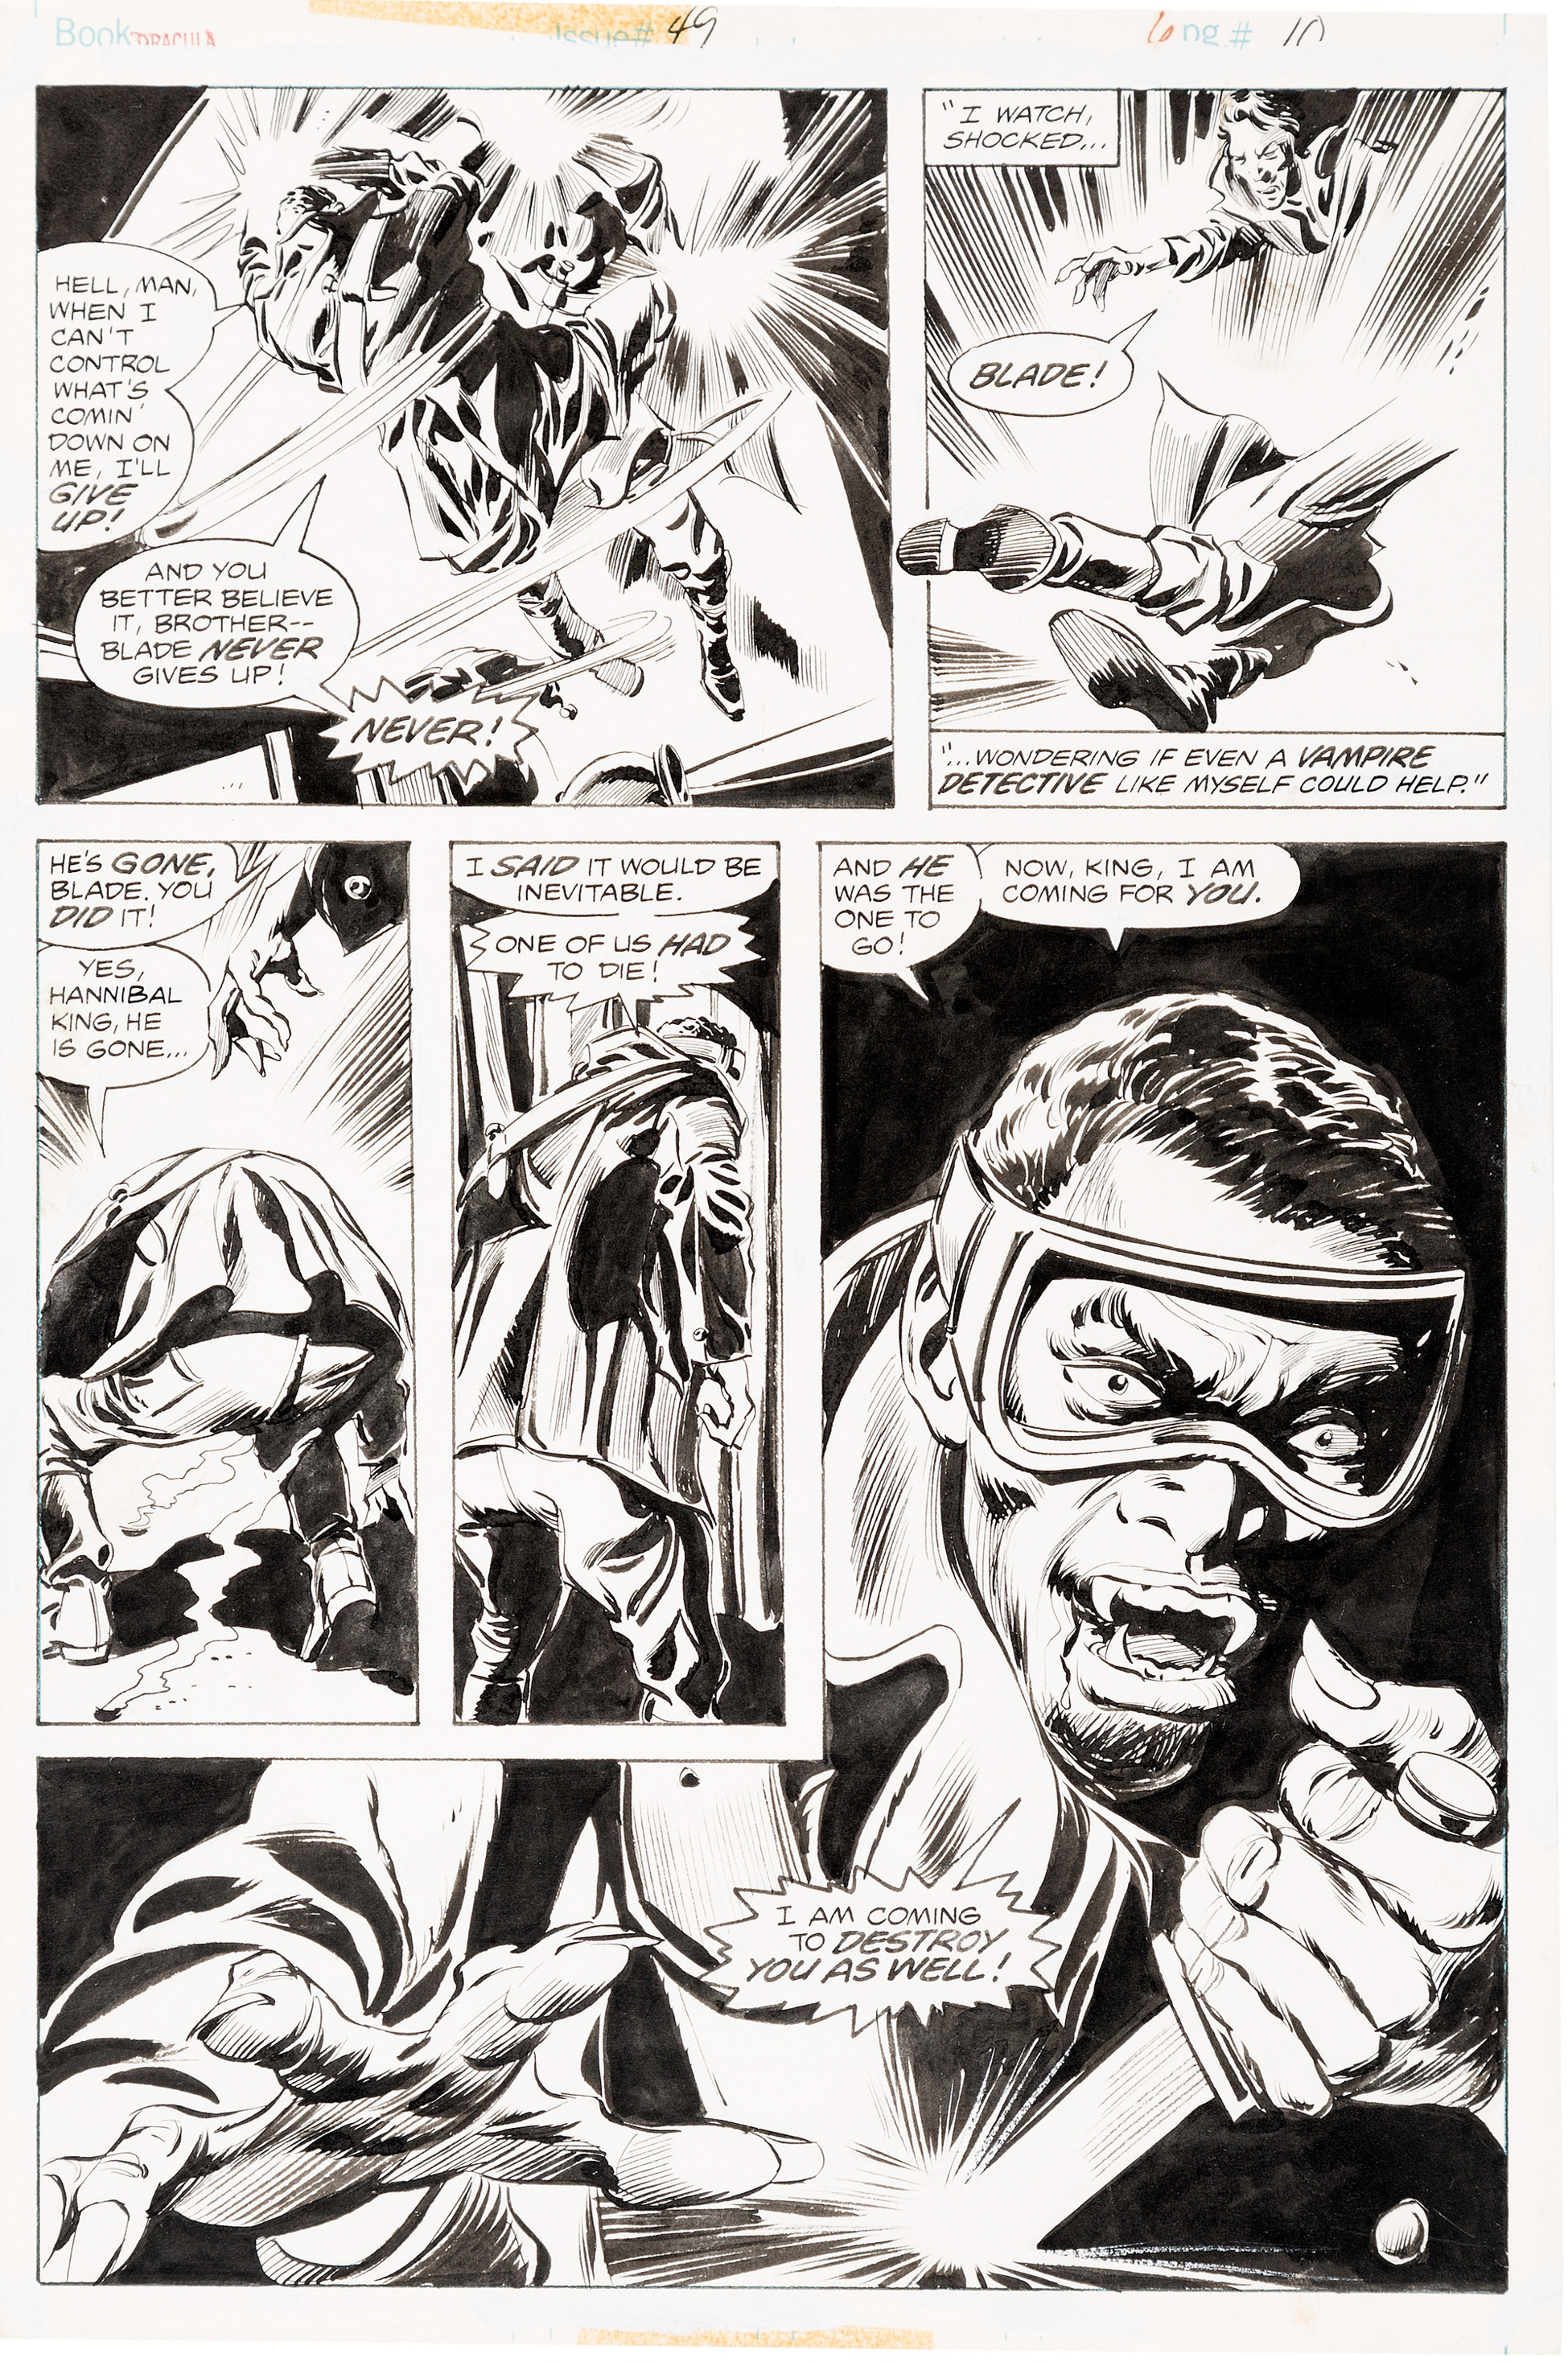 Gene Colan and Tom Palmer Tomb of Dracula #49